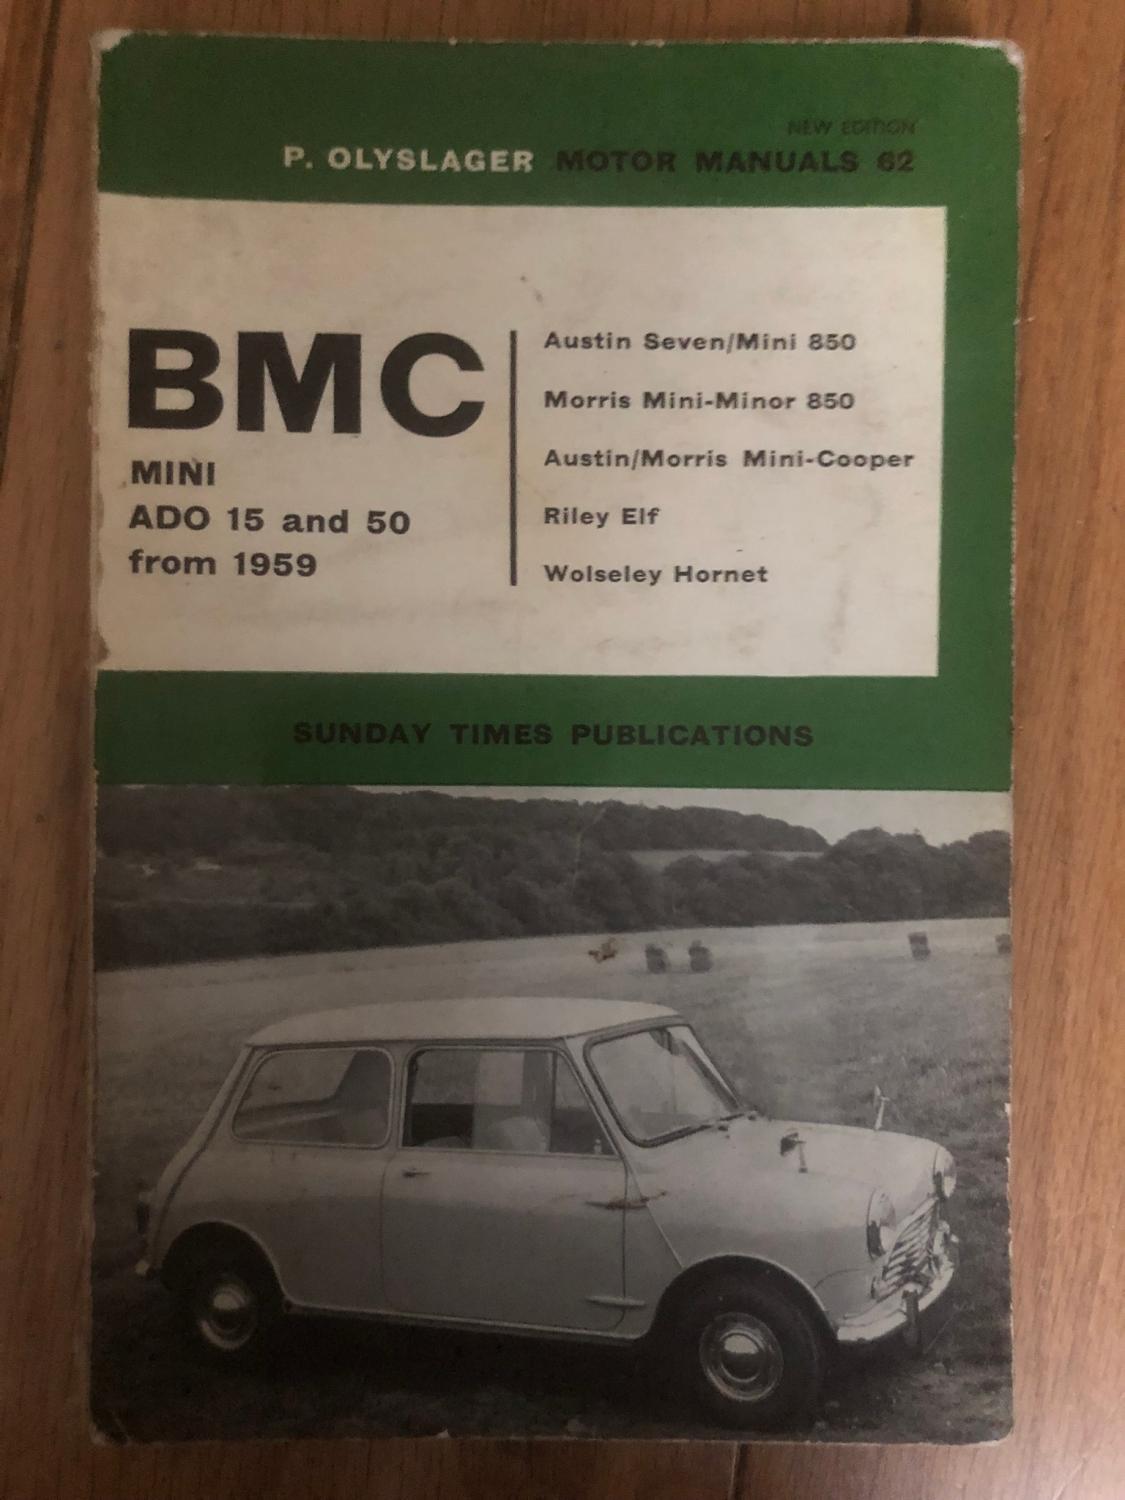 P Olyslager Motor Manuals 62 Bmc Ado 15 And 50 Austin Seven Mini 850 Morris Mini Minor 850 Austin Morris Mini Cooper Riley Elf Wolseley Hornet From 1959 By Piet Olyslager Good Soft Cover 1965